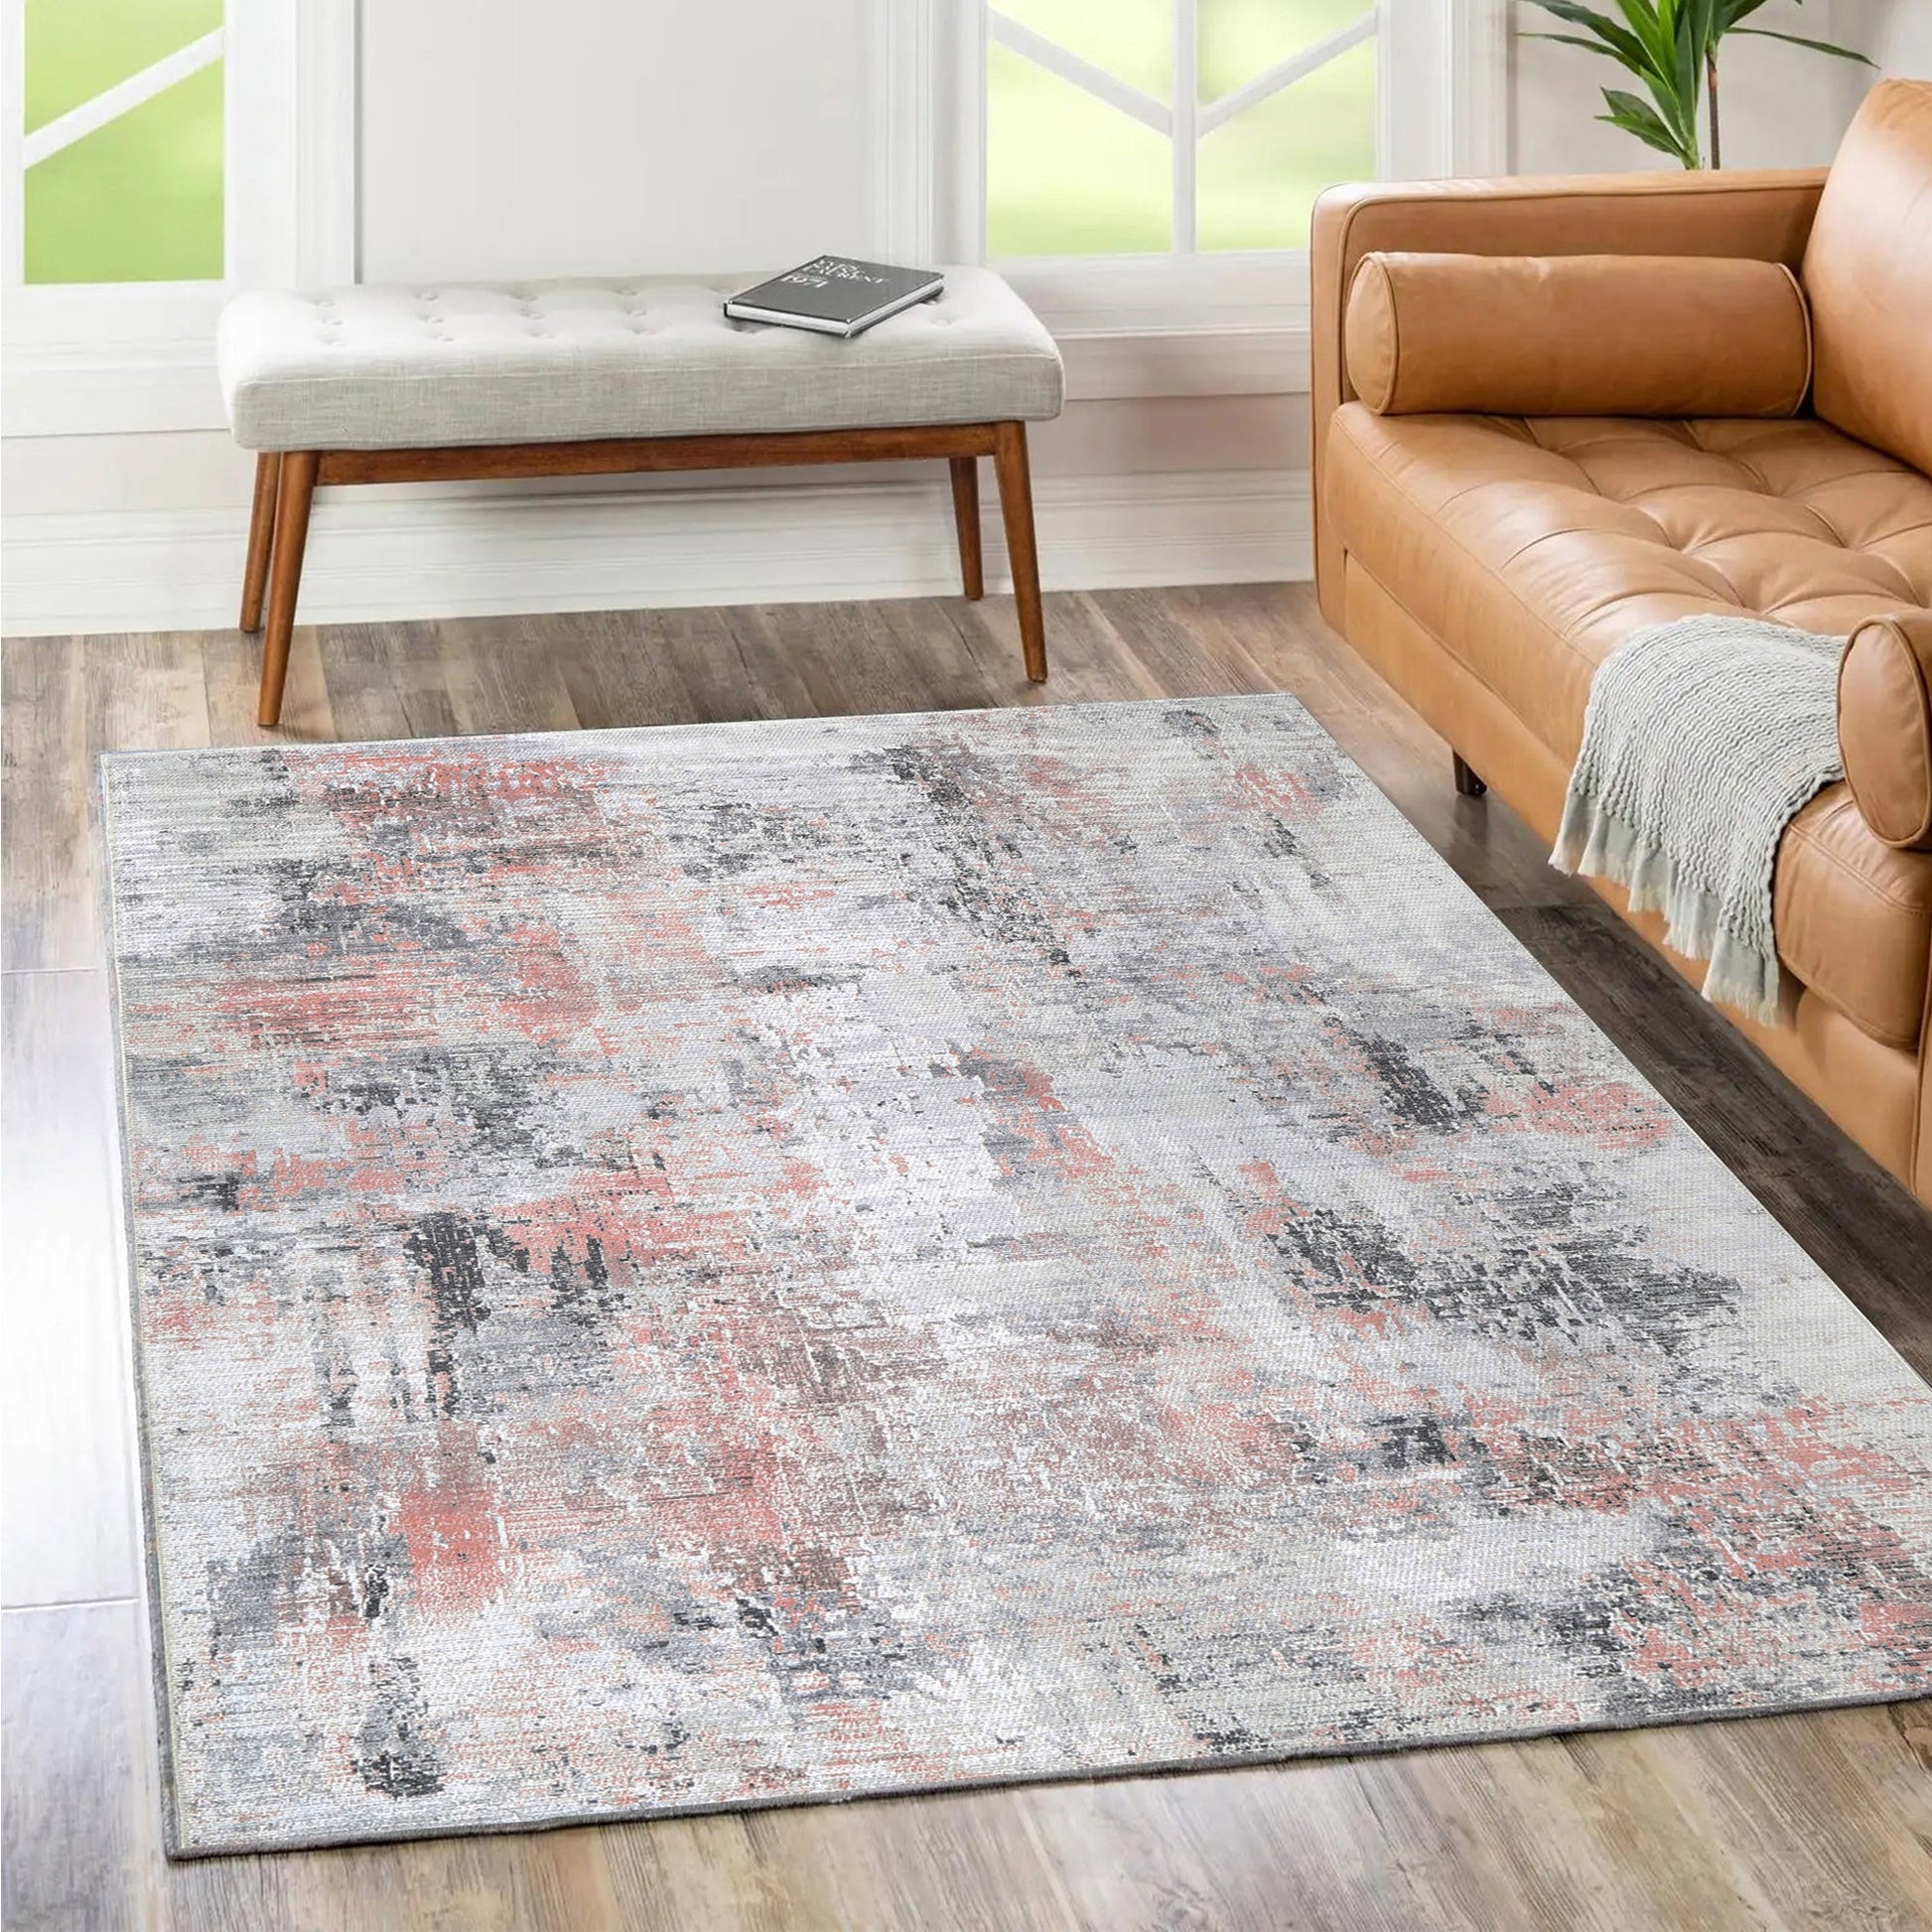 Easy to clean and stylish Vintage Crown collection rug with liquid-repellent NanoWipe technology. Durable and machine washable for high-traffic areas.